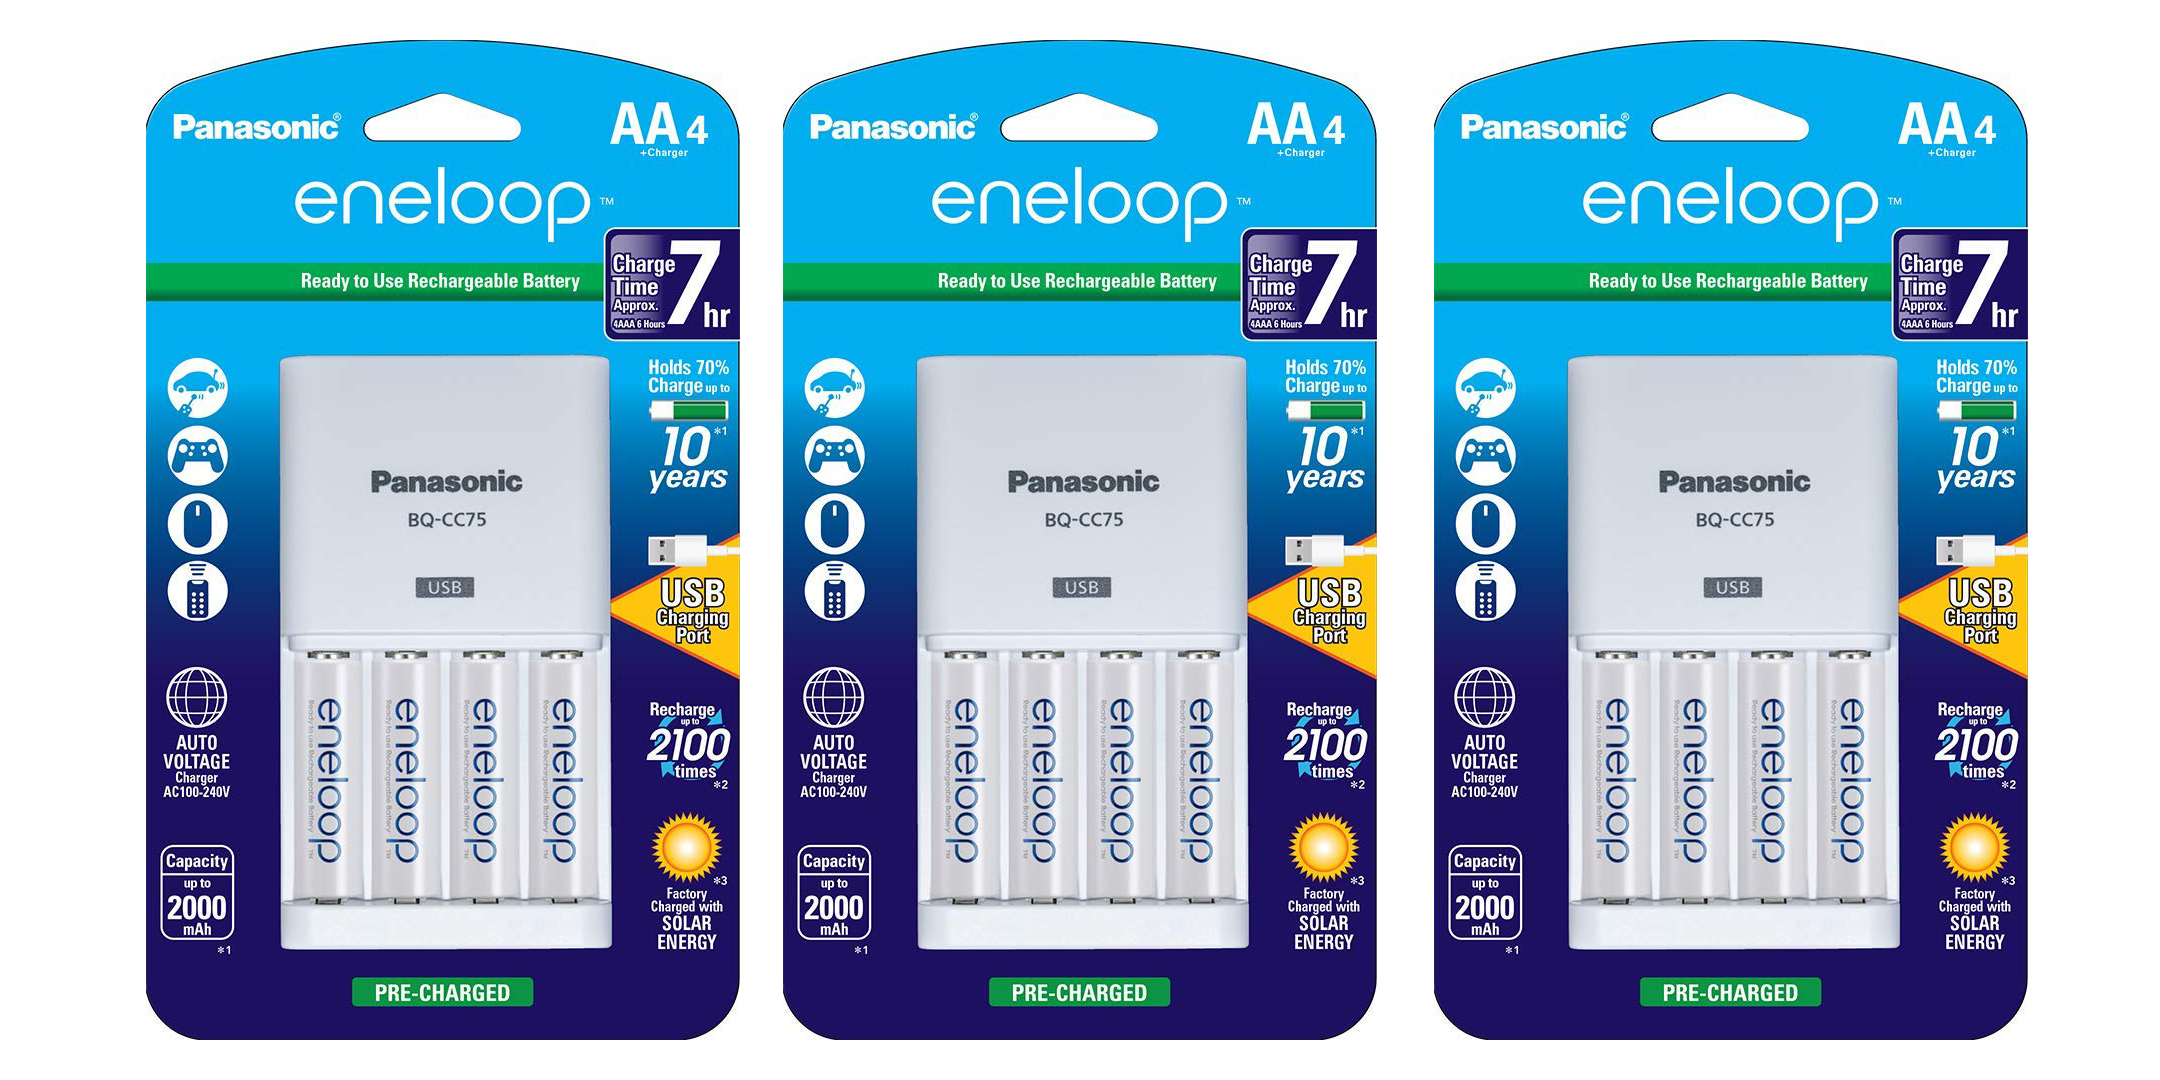 Save on Panasonic eneloop rechargeable batteries, electric lawn mowers and more in today’s Green Deals